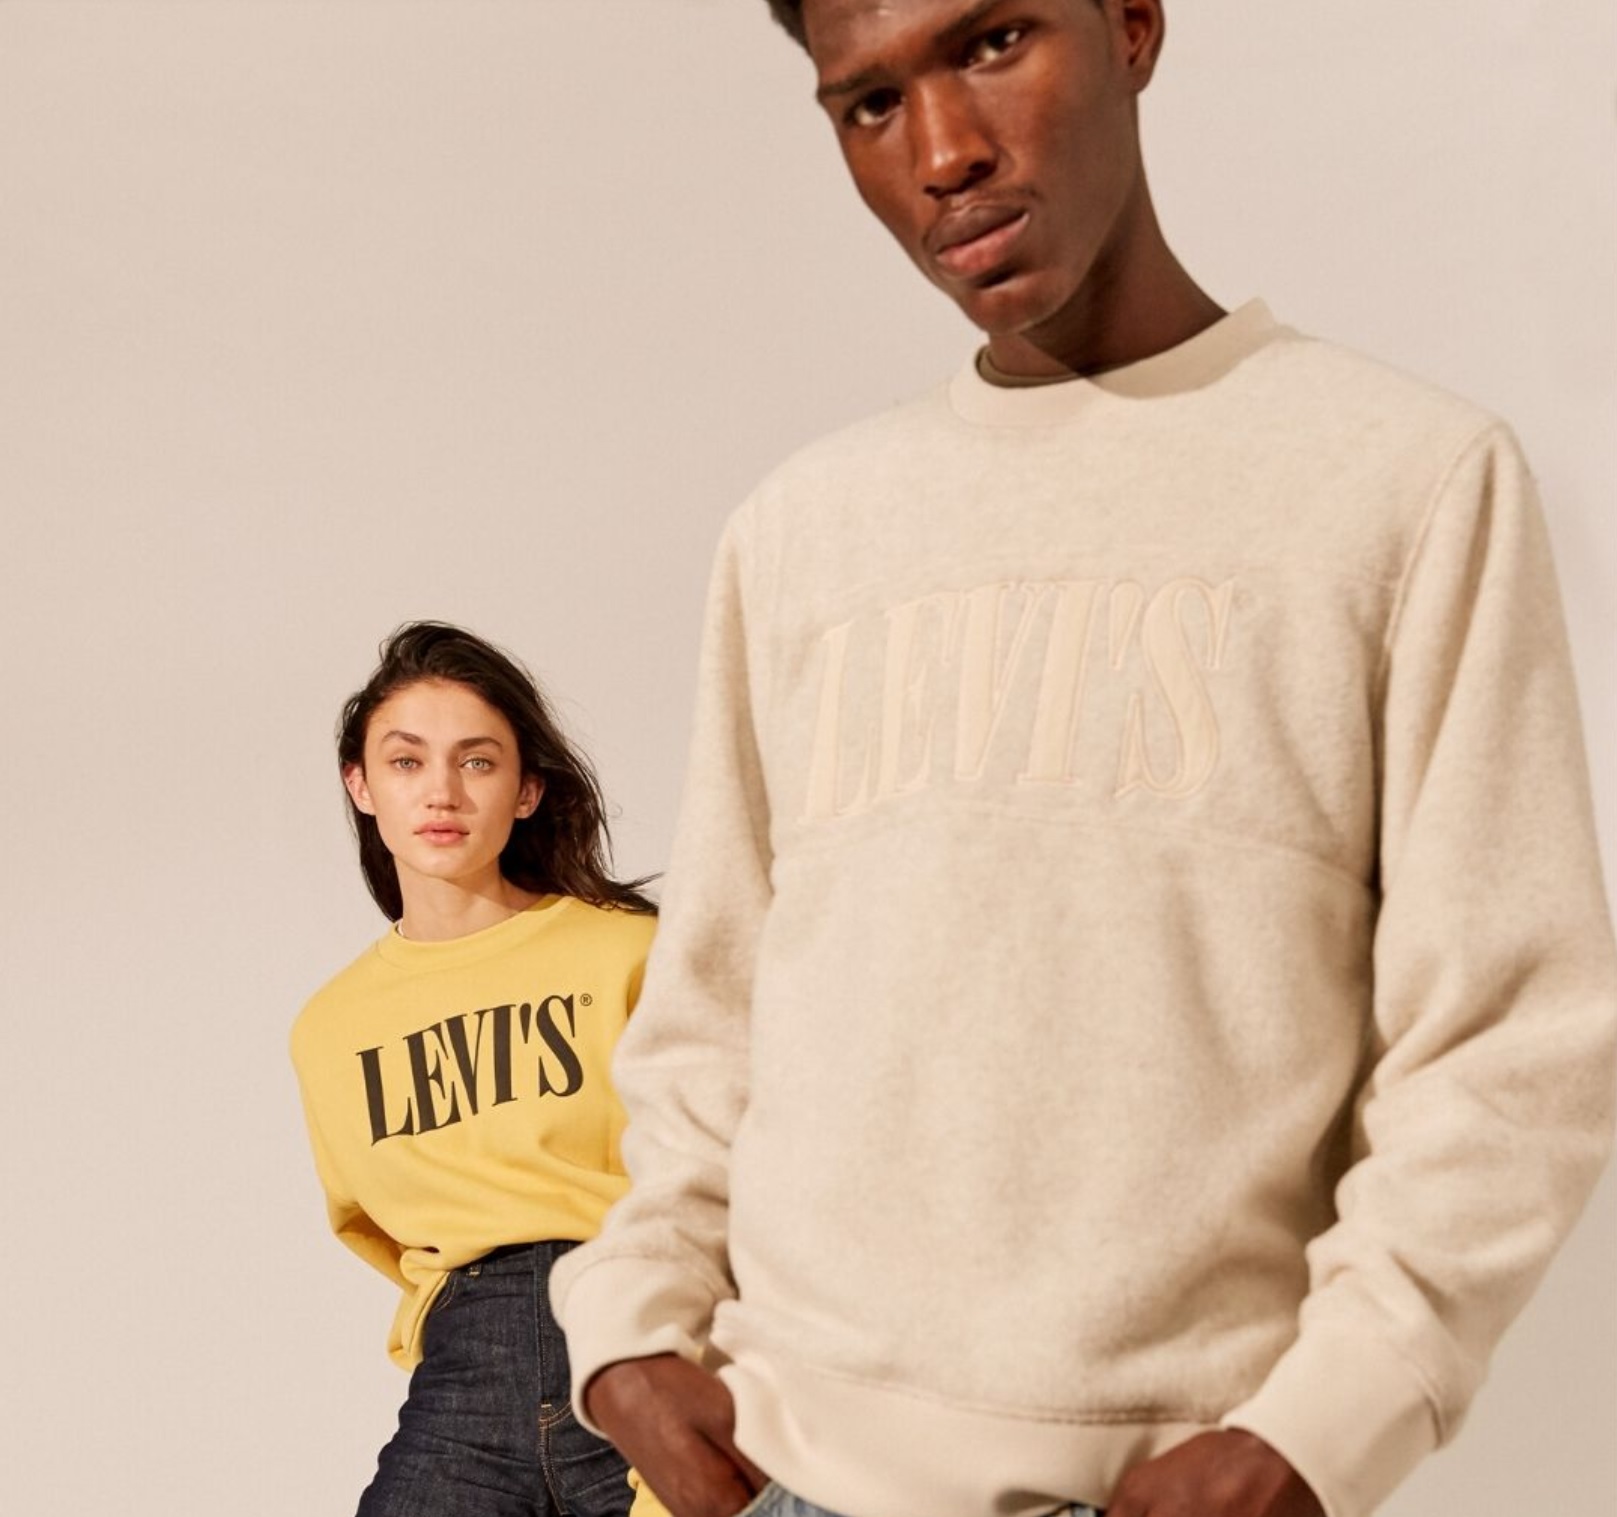 levis free shipping code